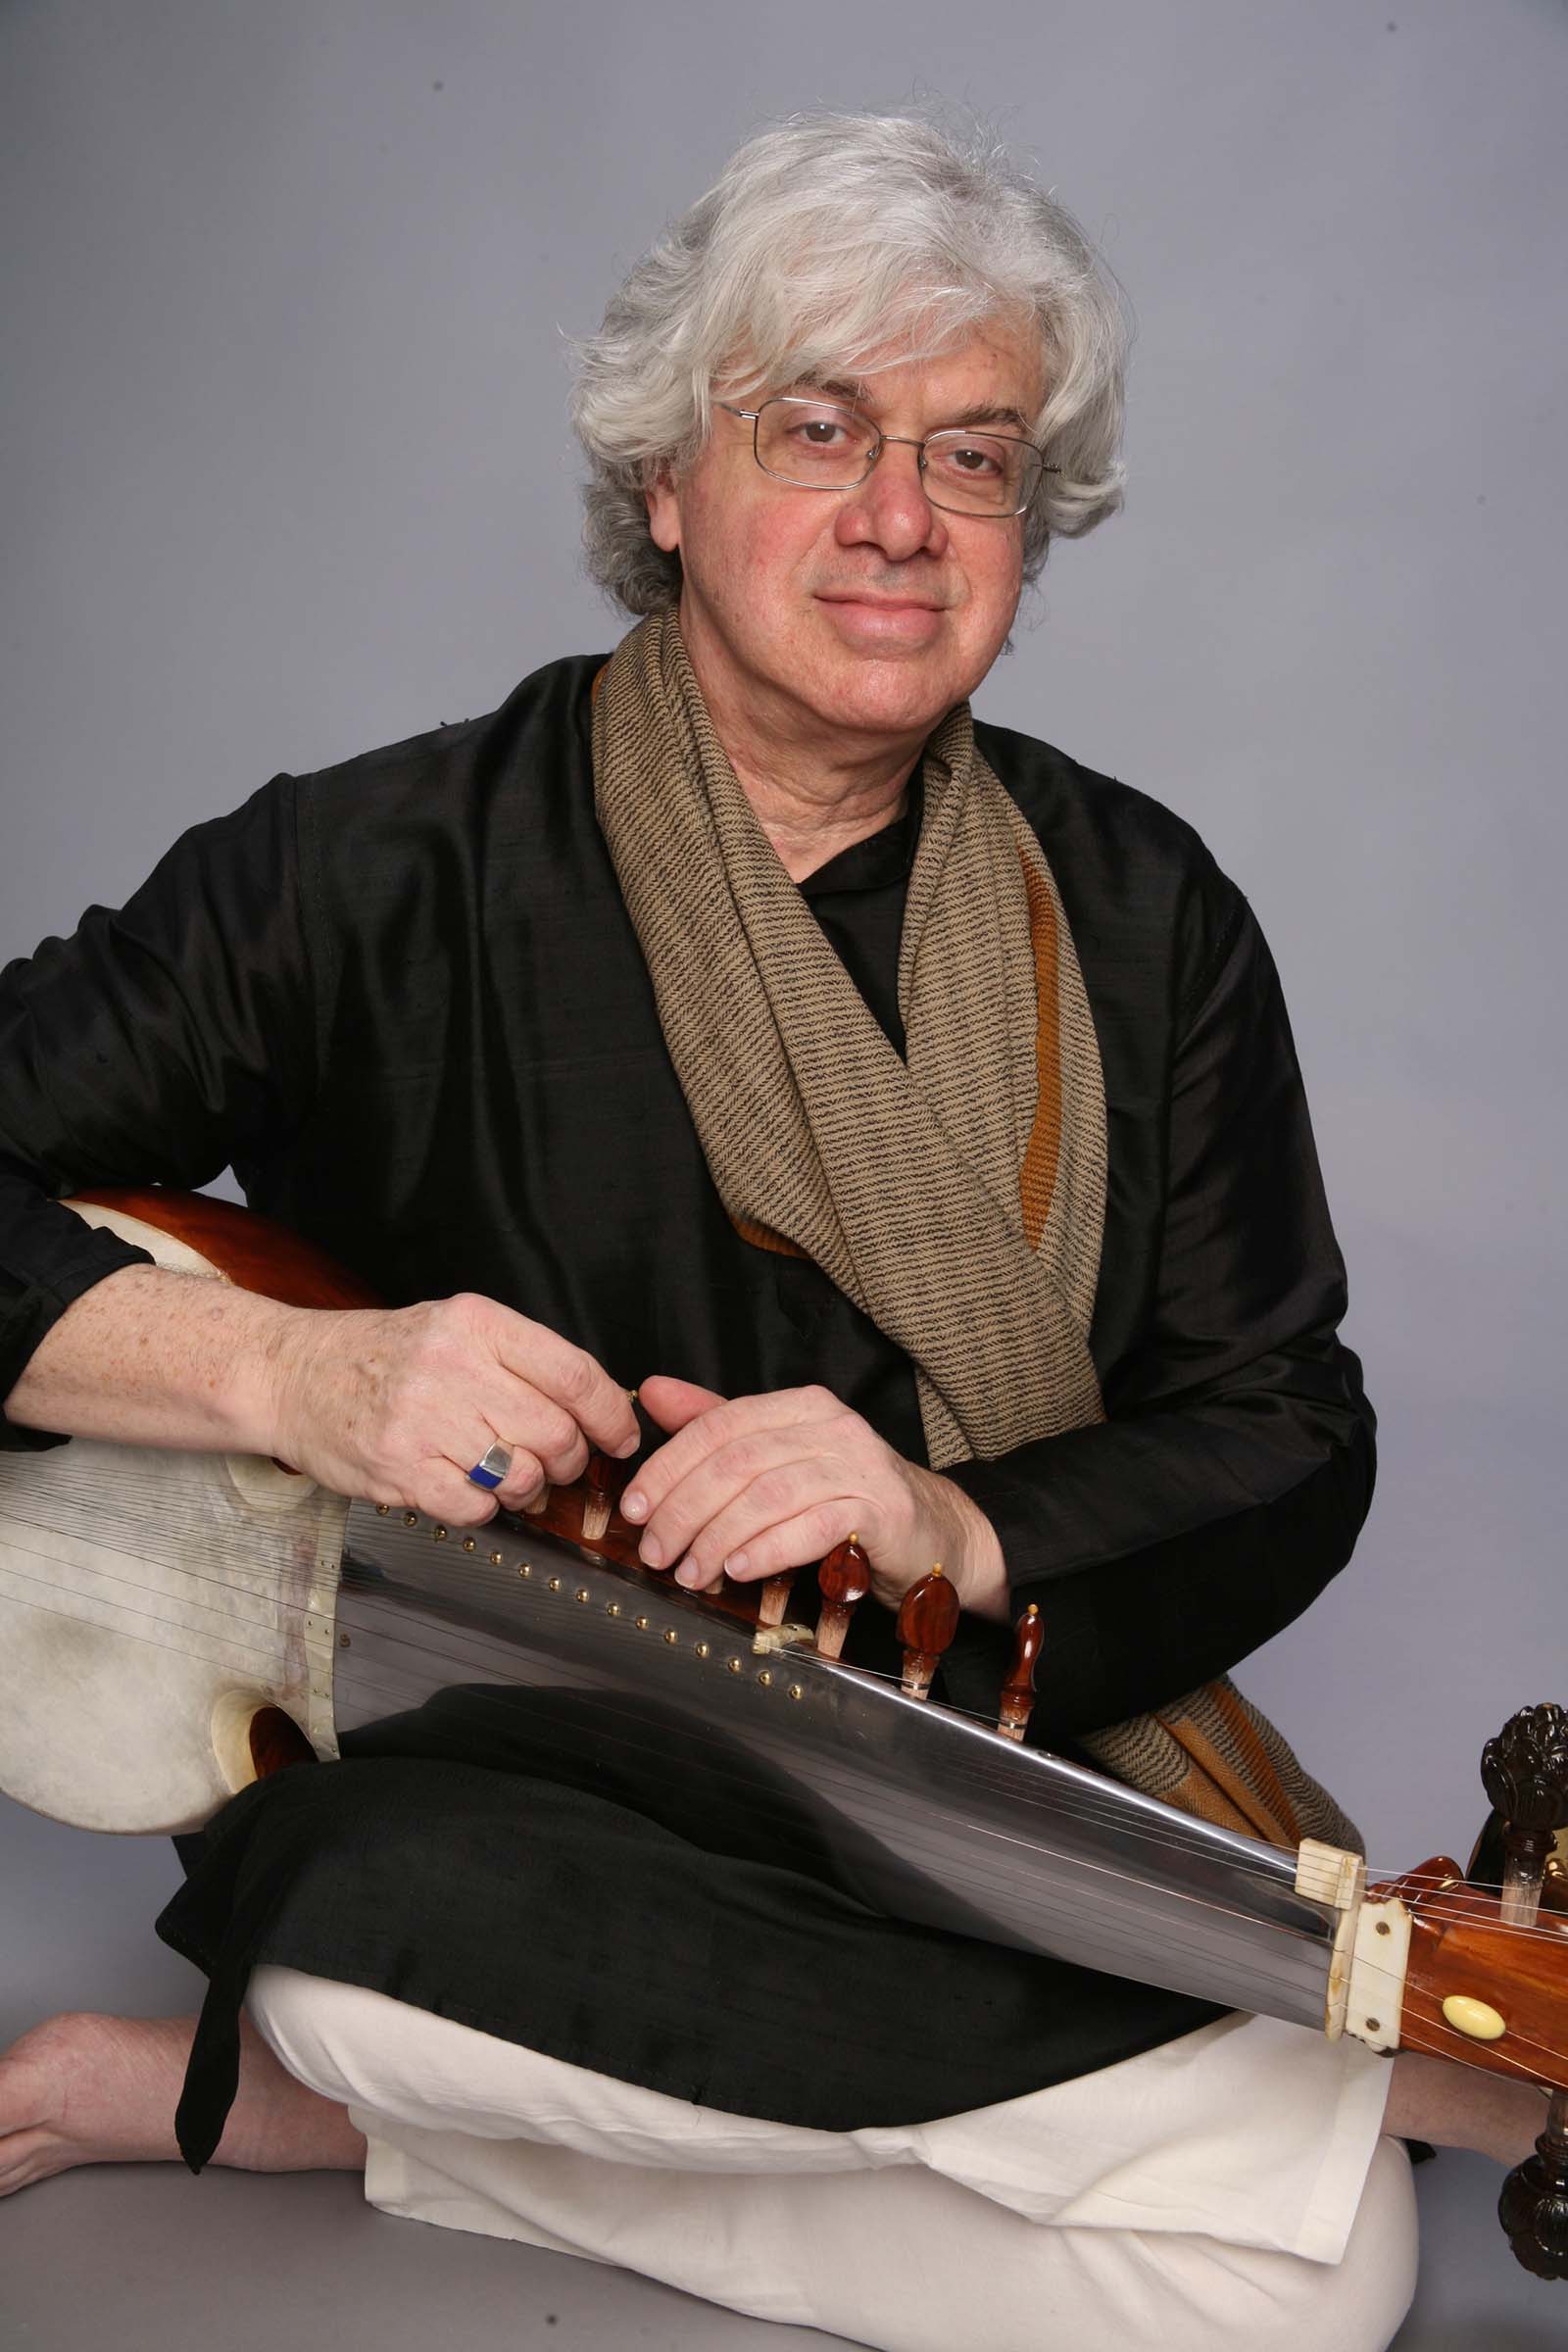 David Trasoff is seated cross-legged on the floor with a sarode across his lap. A sarode is a multi-stringed instrument. David has wavy silver hair and glasses.